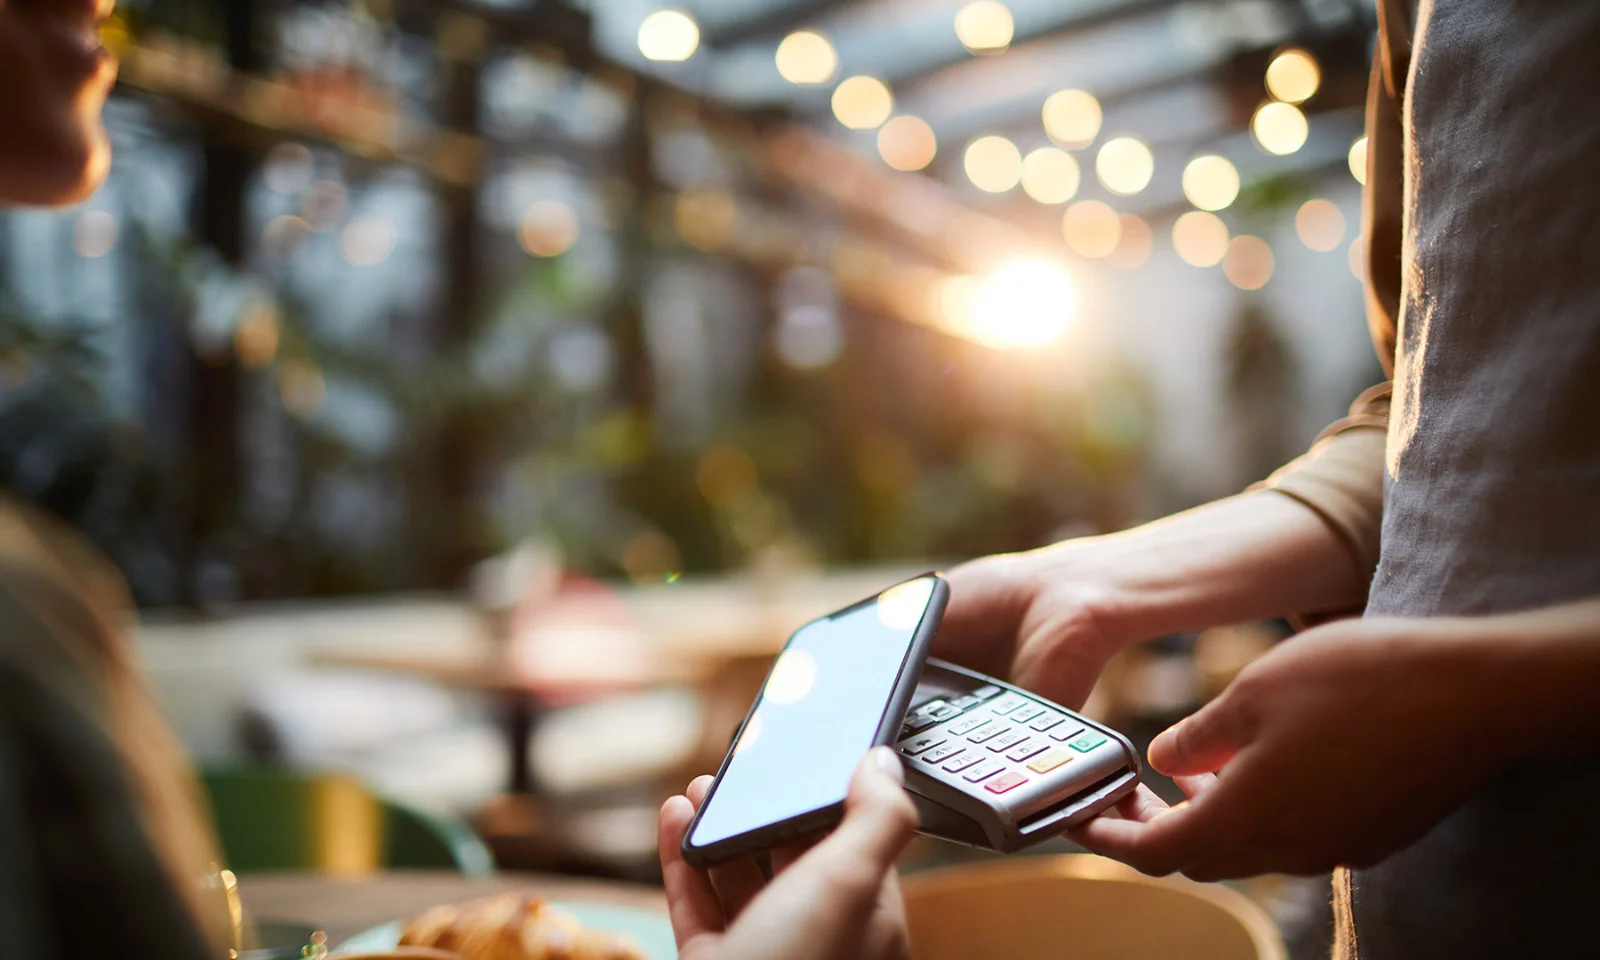  A close-up shot of a mobile payment transaction in a modern cafe, illustrating GFT&#039;s innovative digital payment solutions. This image represents GFT&#039;s commitment to advancing fintech and seamless customer experiences through cutting-edge technology.